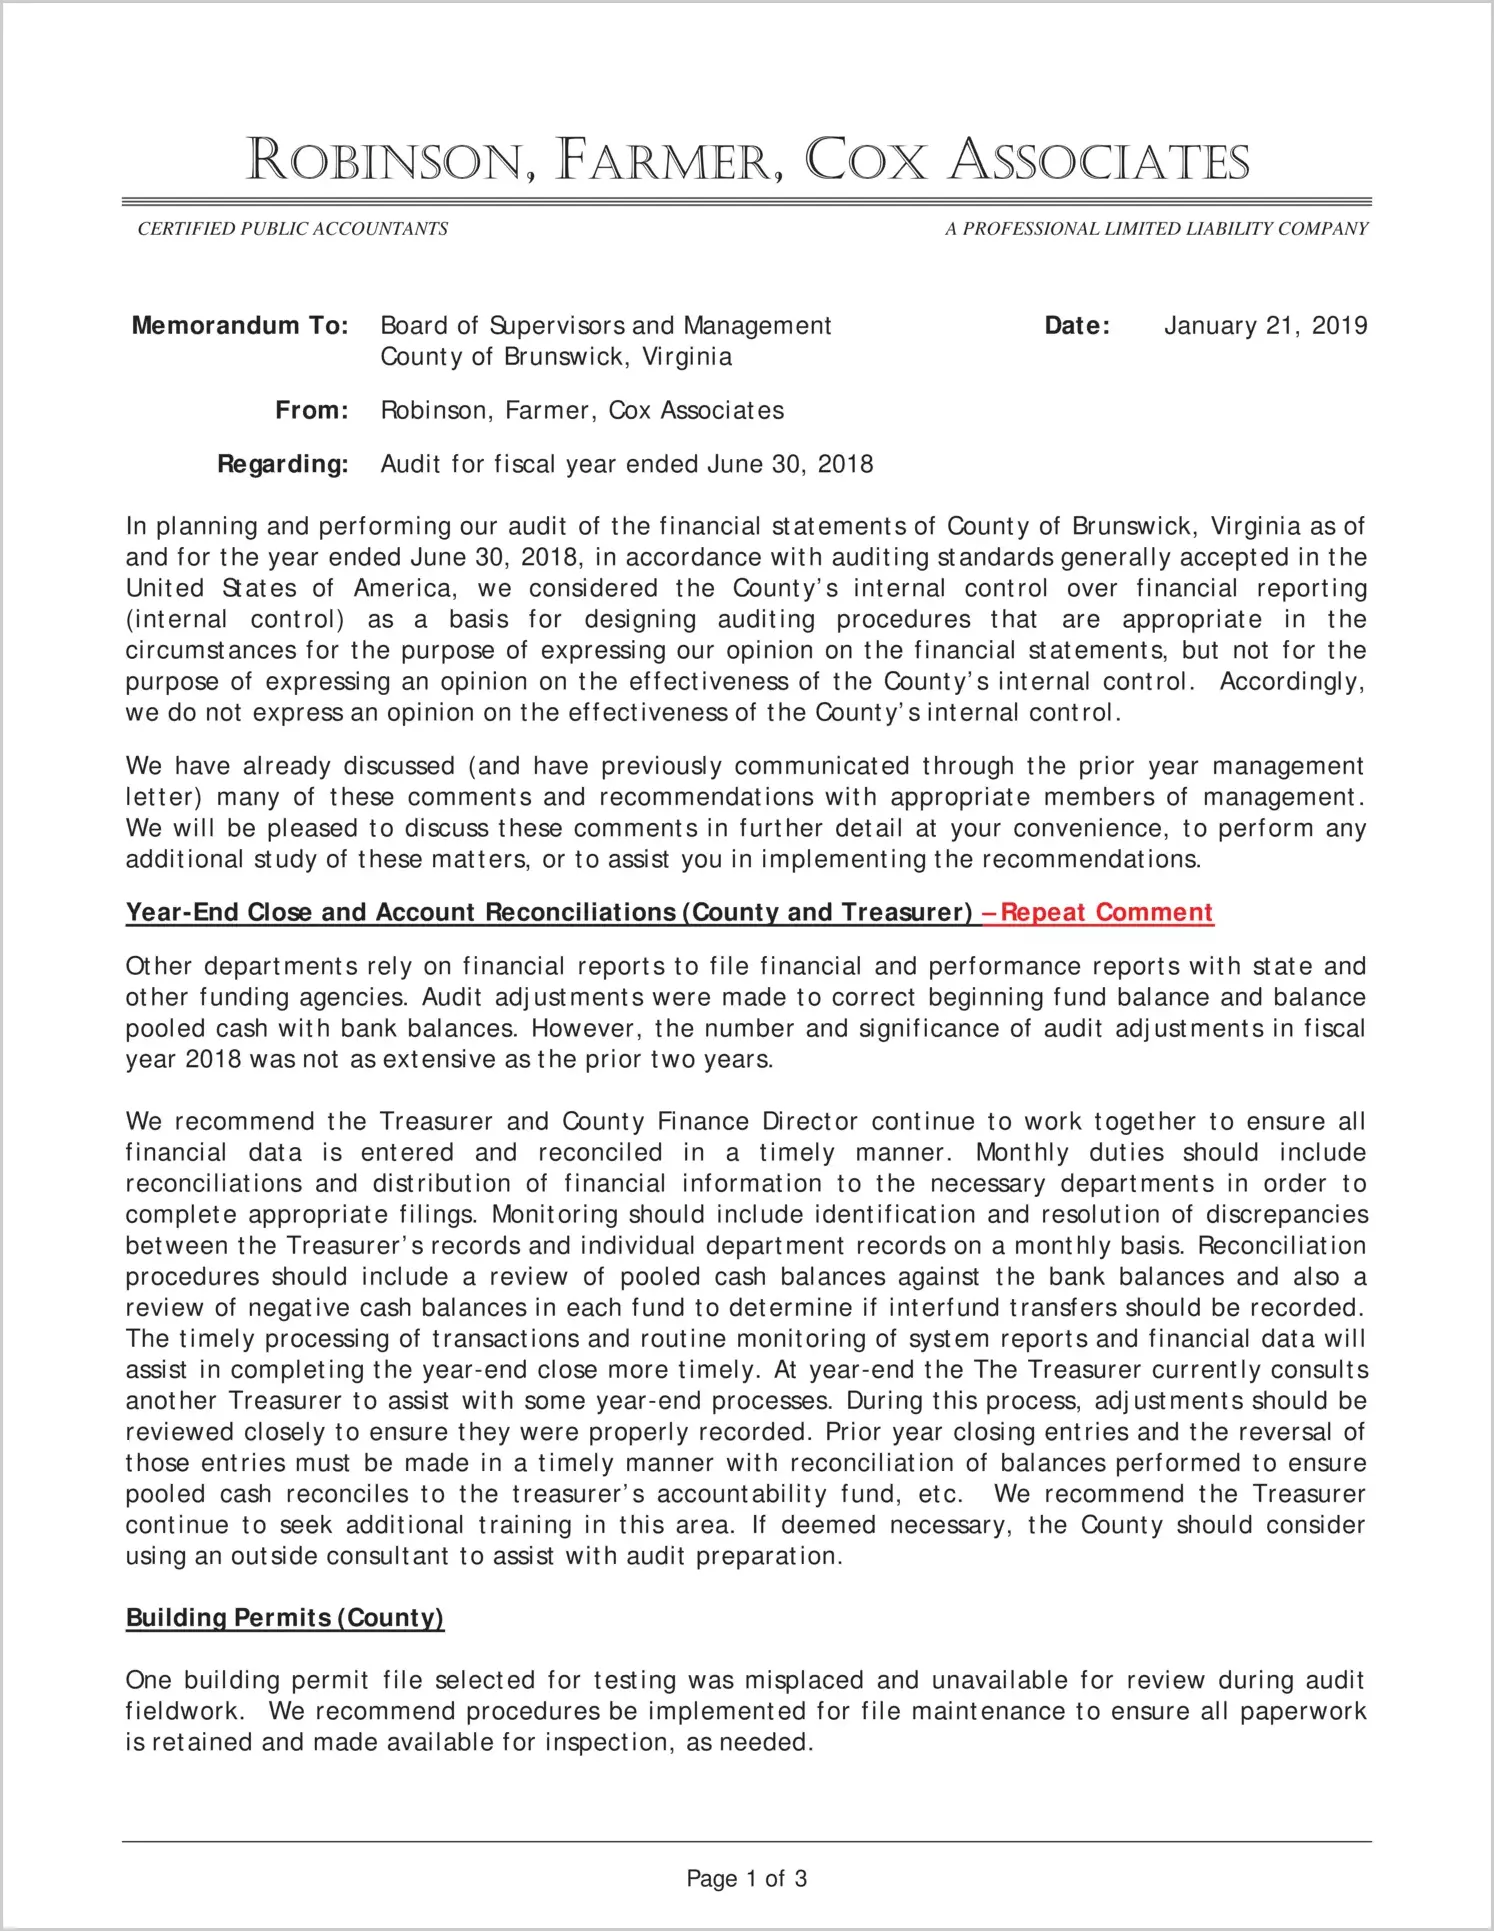 2018 Management Letter for County of Brunswick